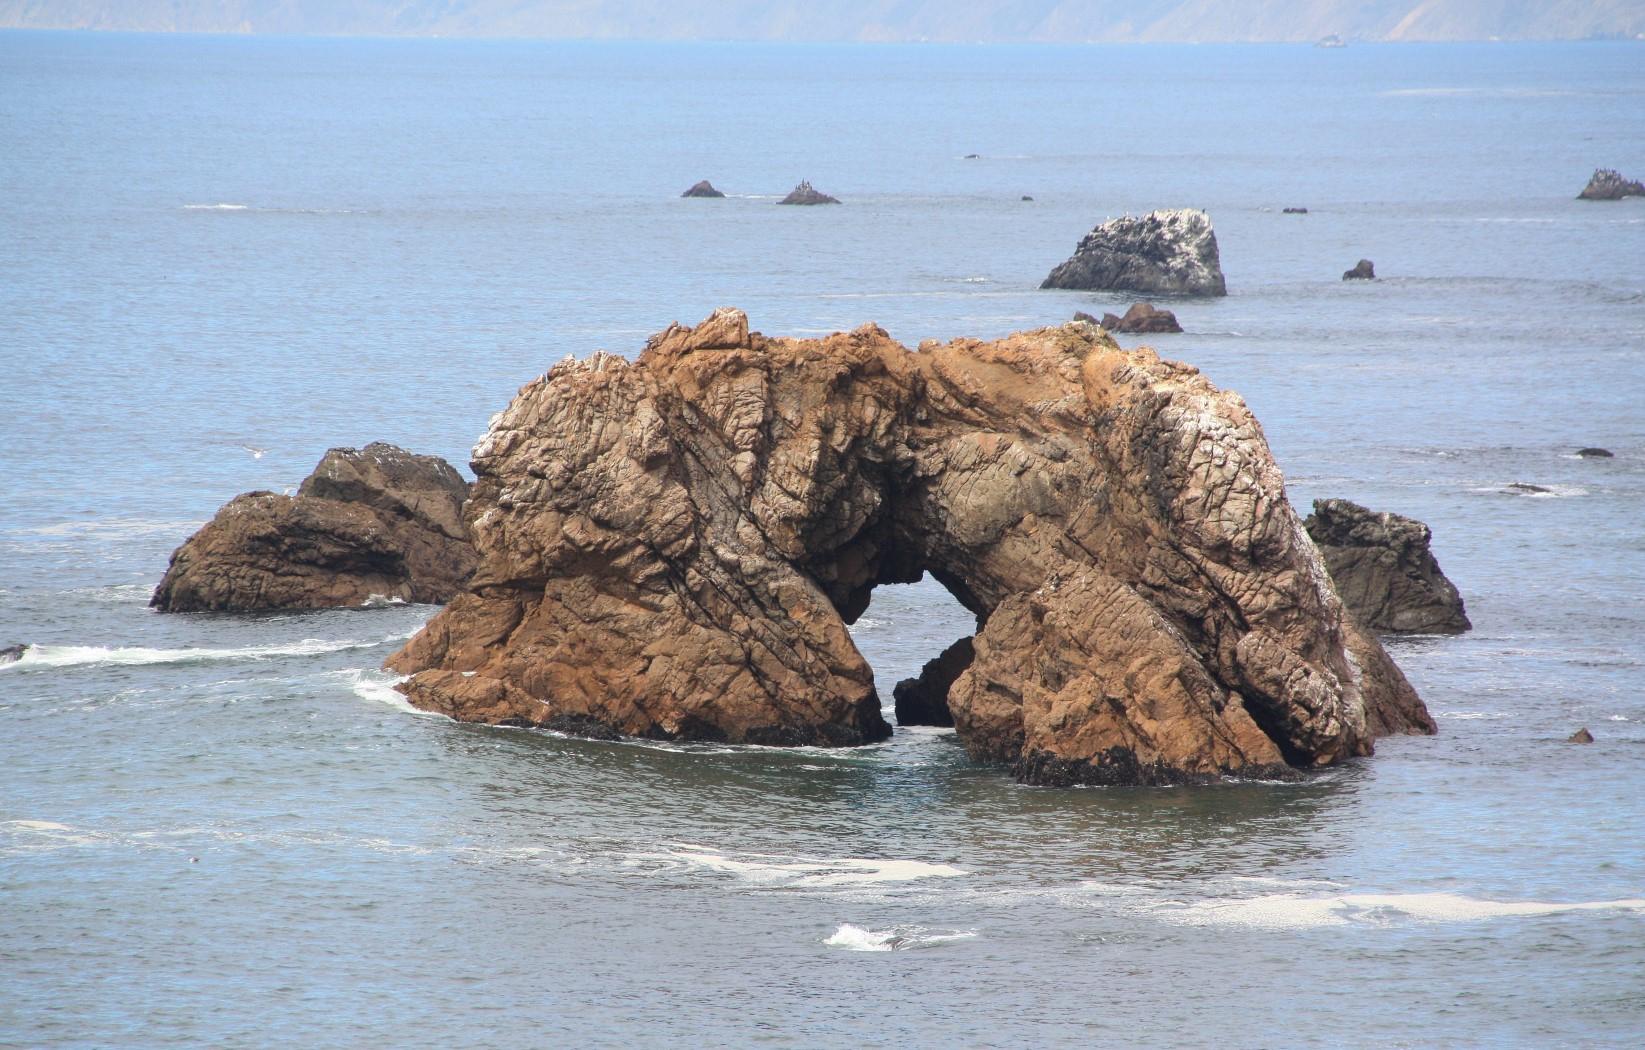 Sandee - Arched Rock Beach